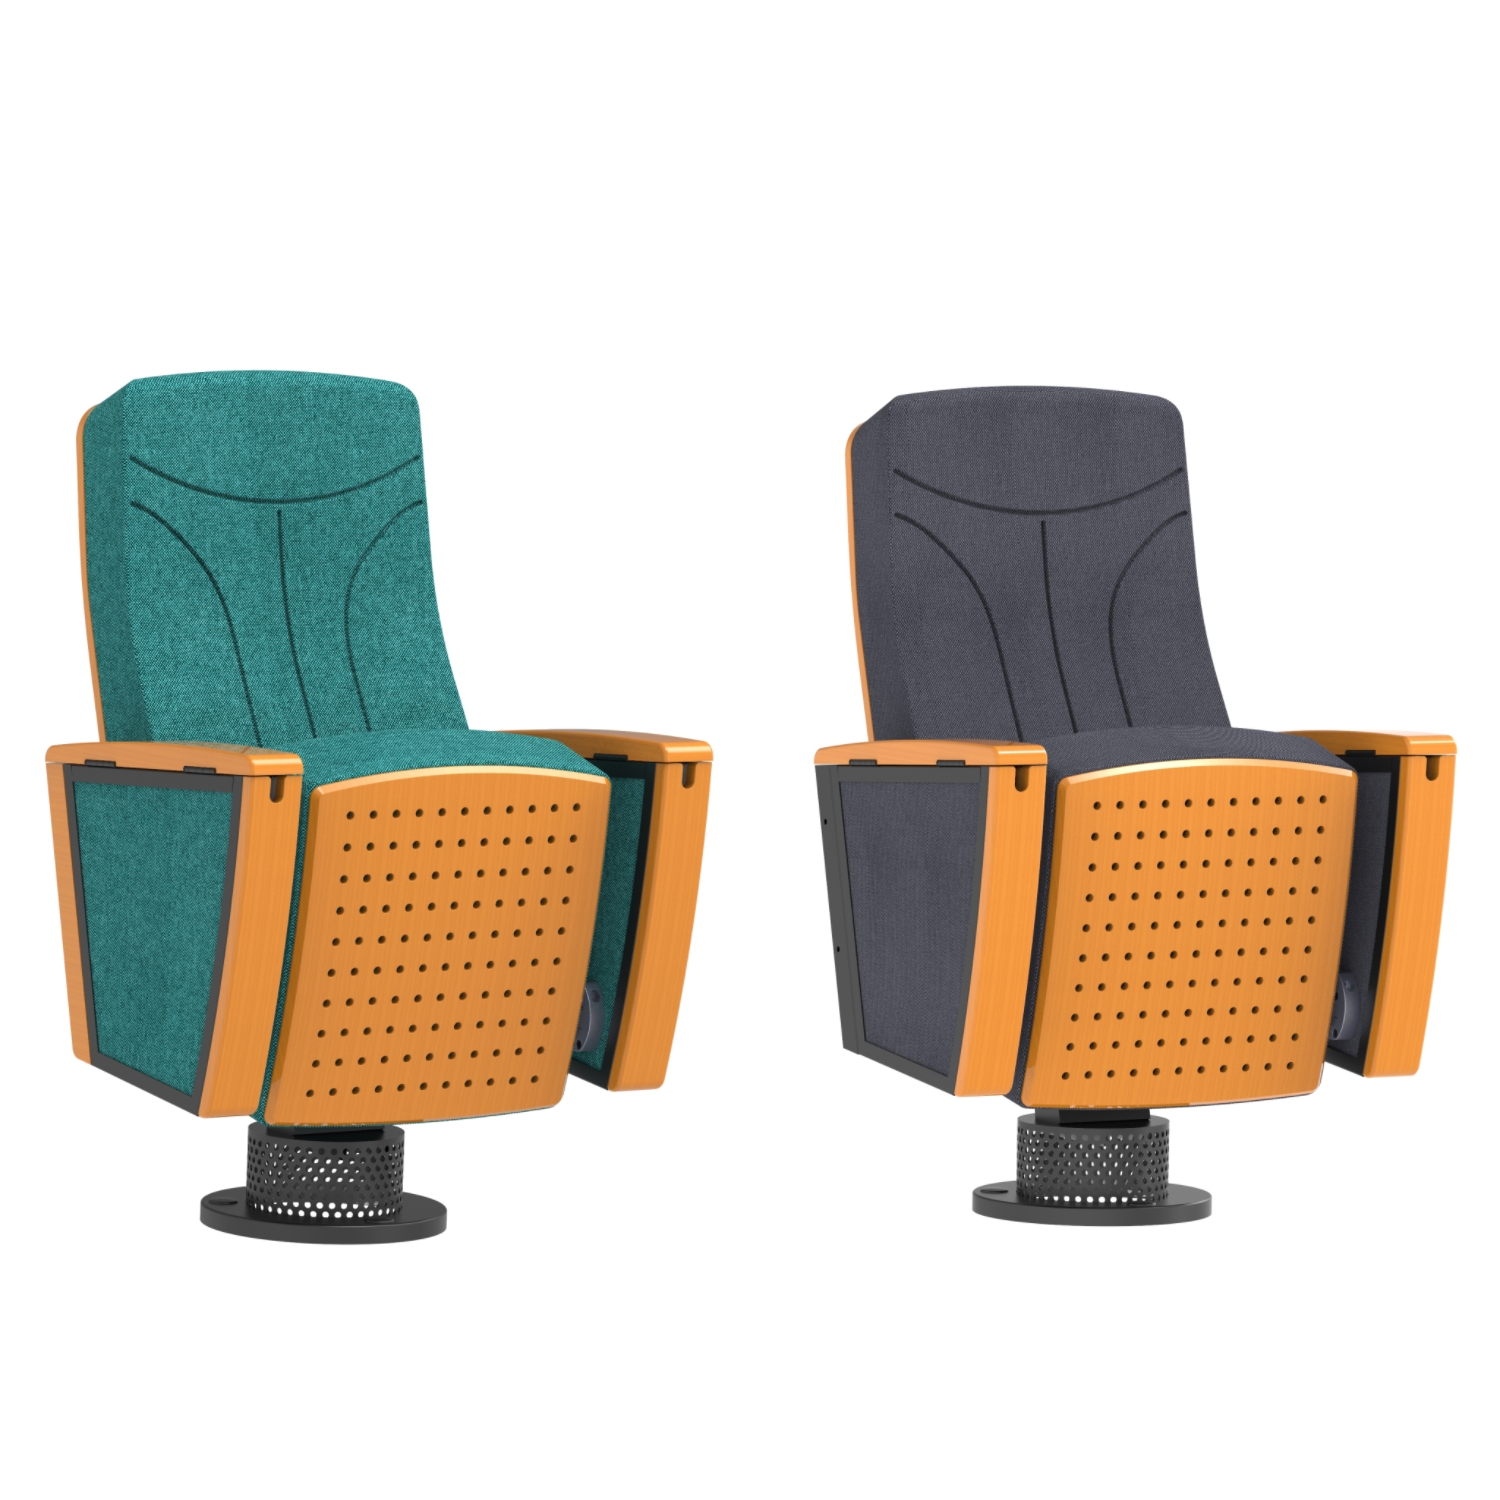 Factory Theater seating furniture lecture hall training fabric cushion plastic auditorium chair